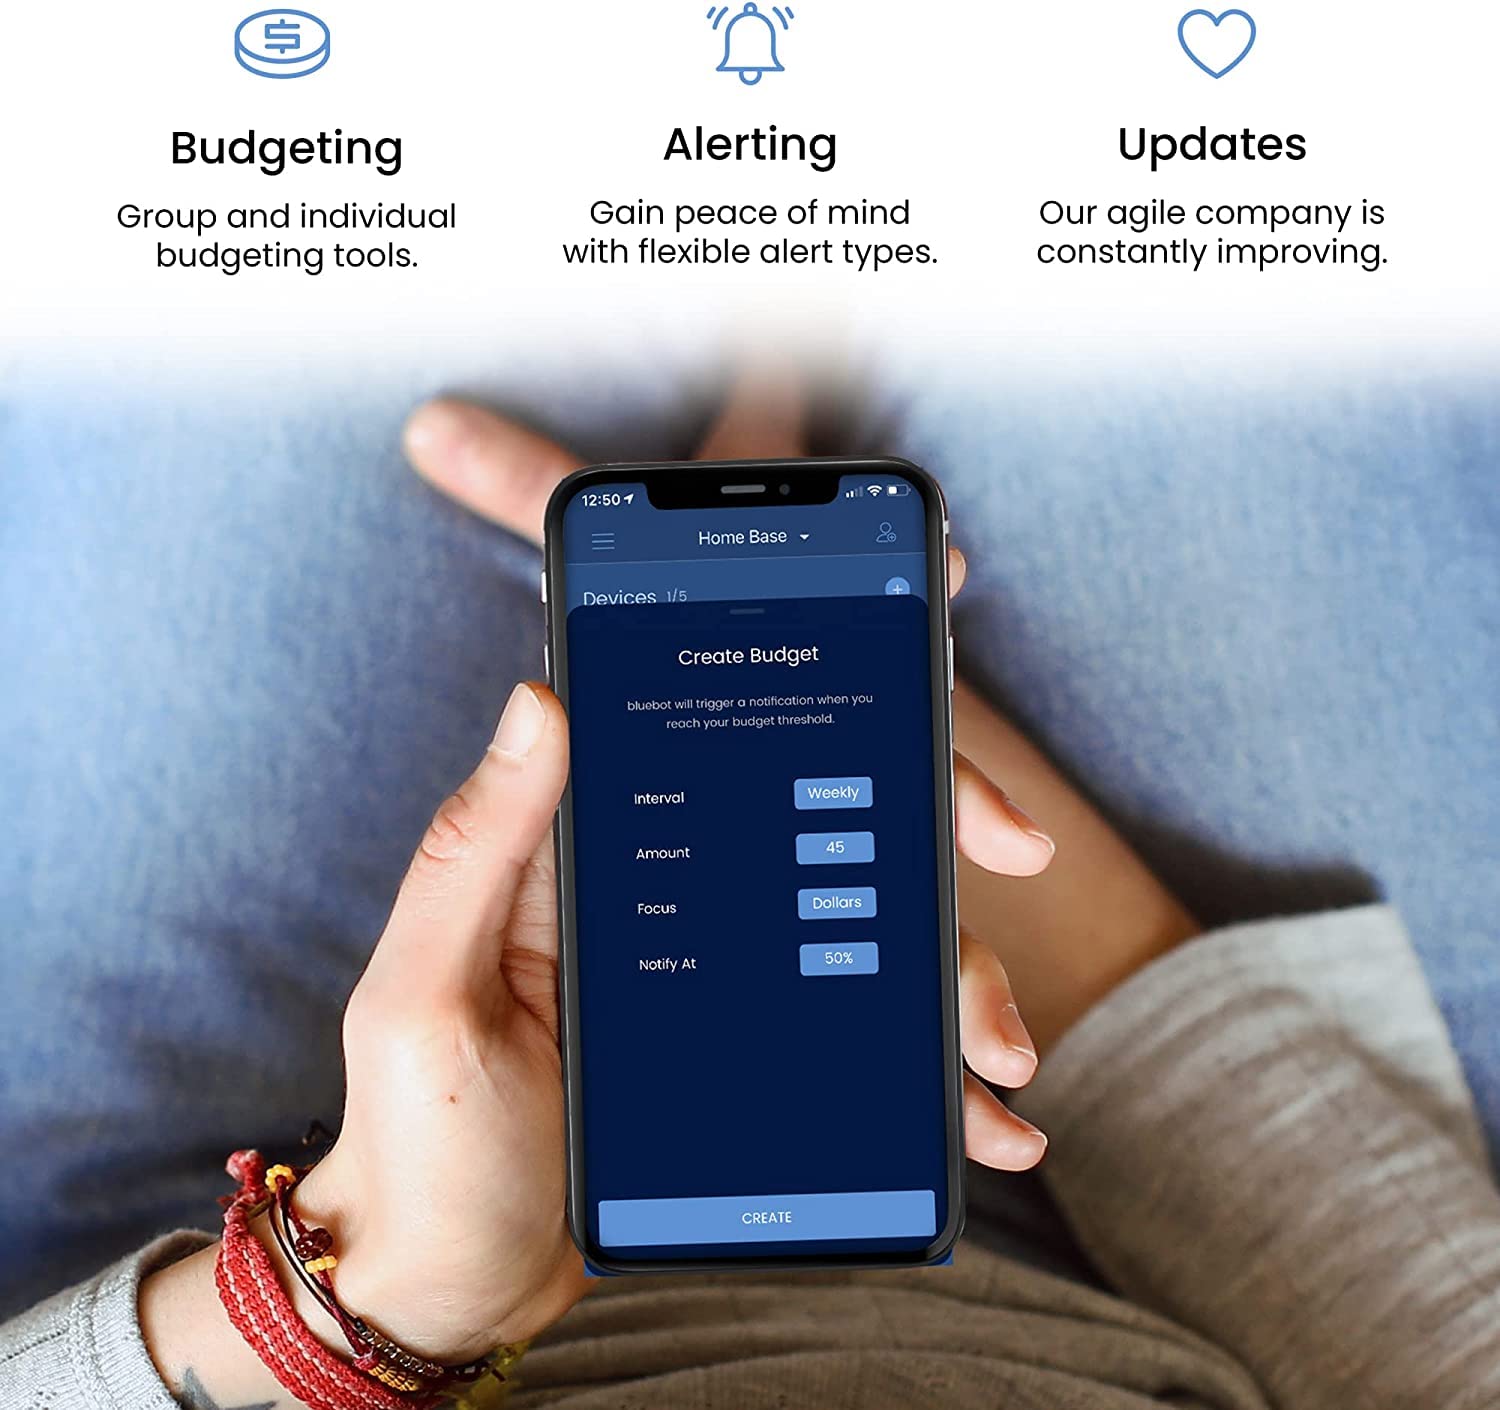 bluebot Universal Smart Home Water Meter & iOS App for Leak Detection, Live Water Usage Tracking and Alerting. Sub Meter from One Account. Install in Minutes, No Plumbing or Subscription Required.